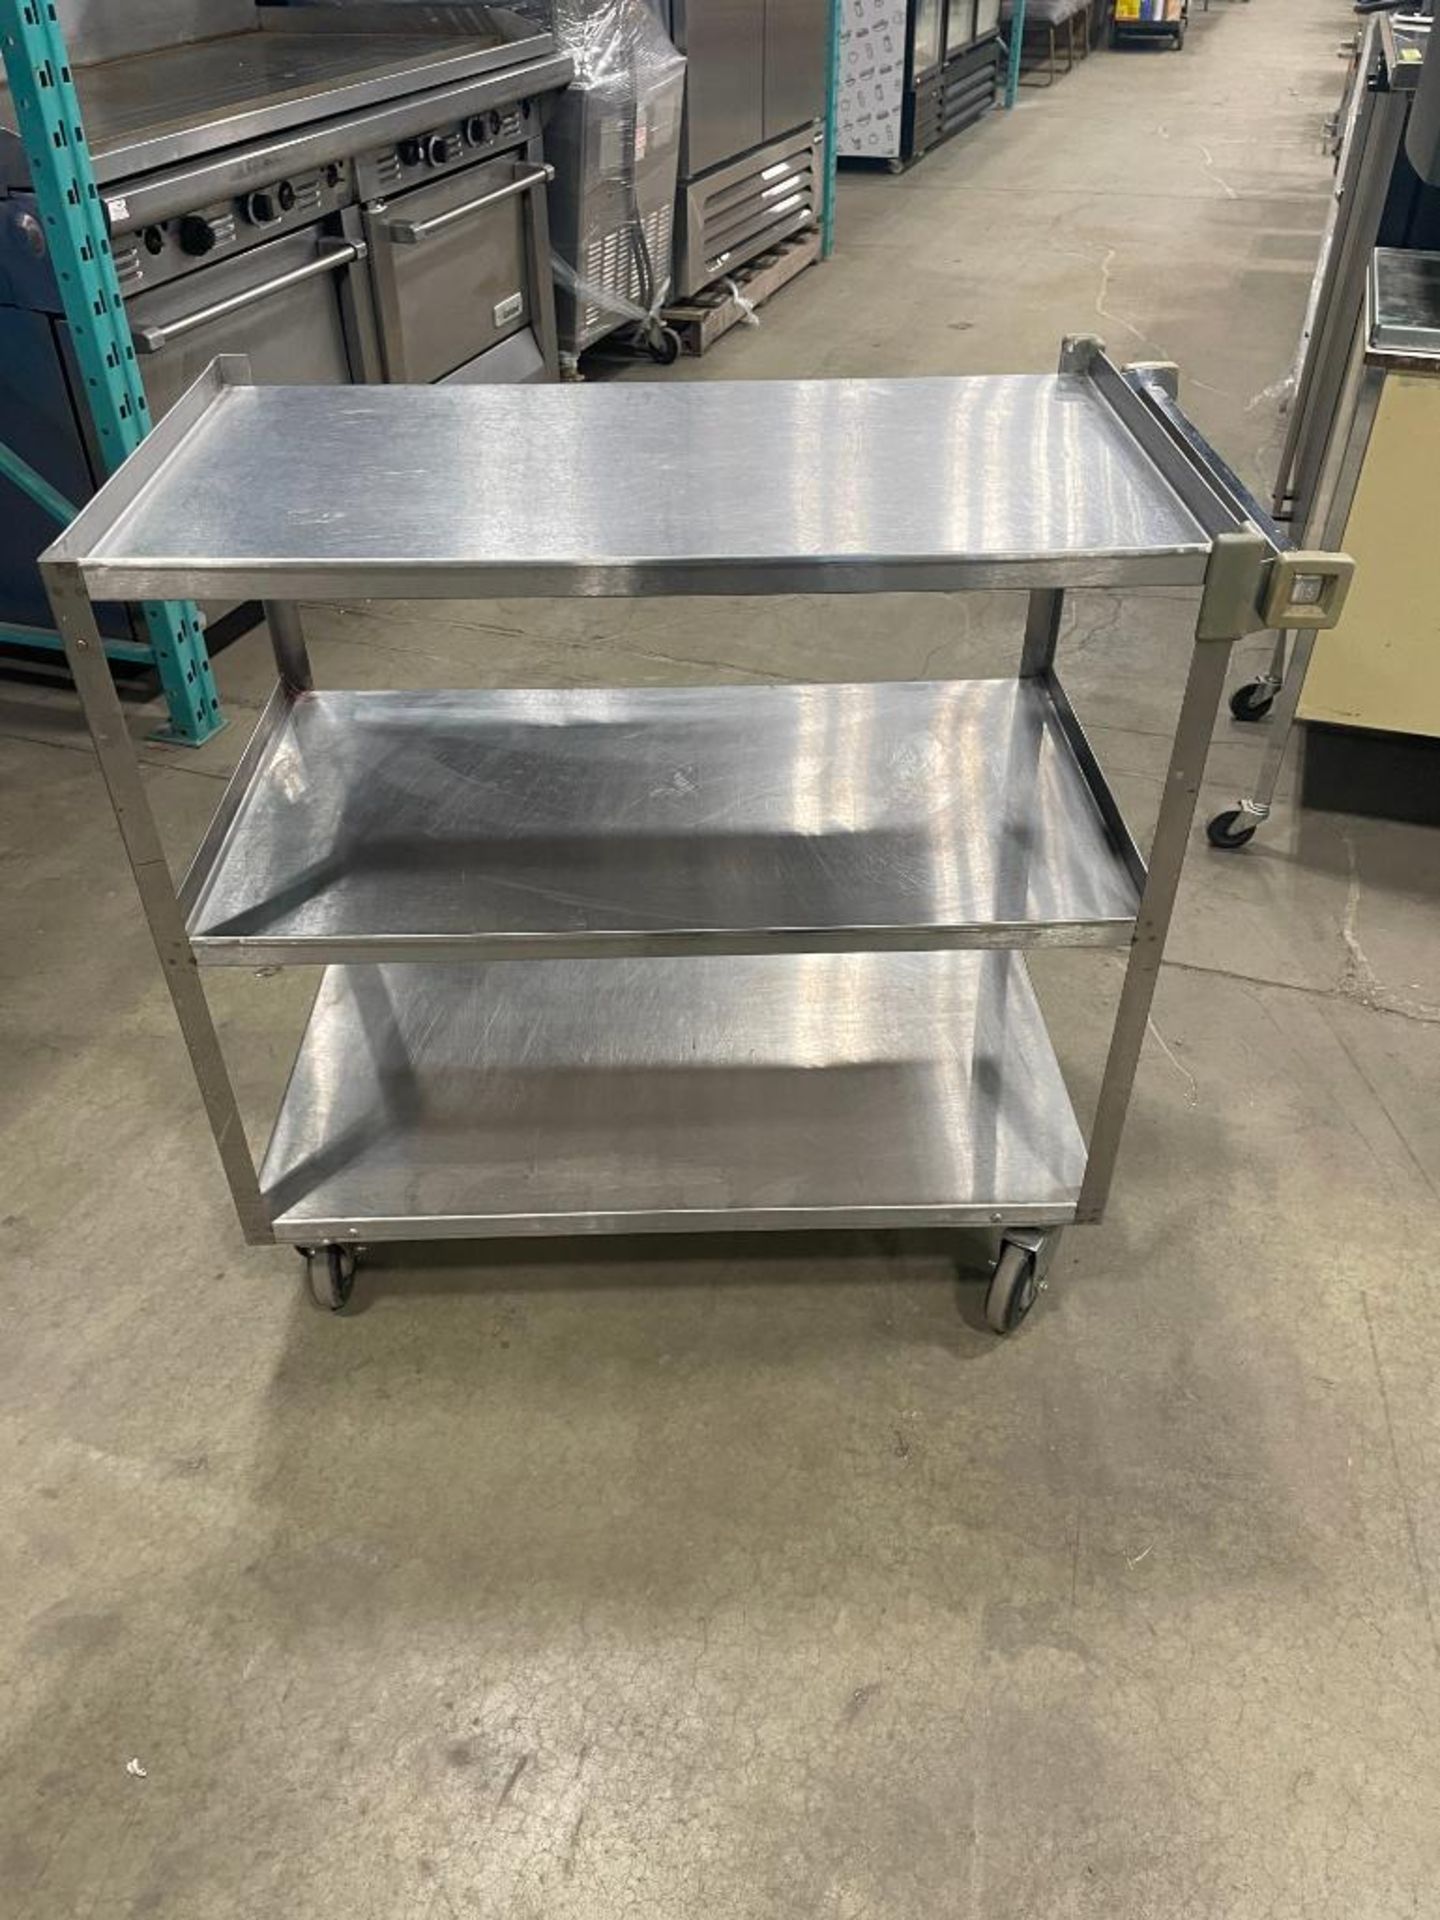 BLOOMFIELD 3-TIER STAINLESS STEEL BUSSING CART - Image 6 of 6